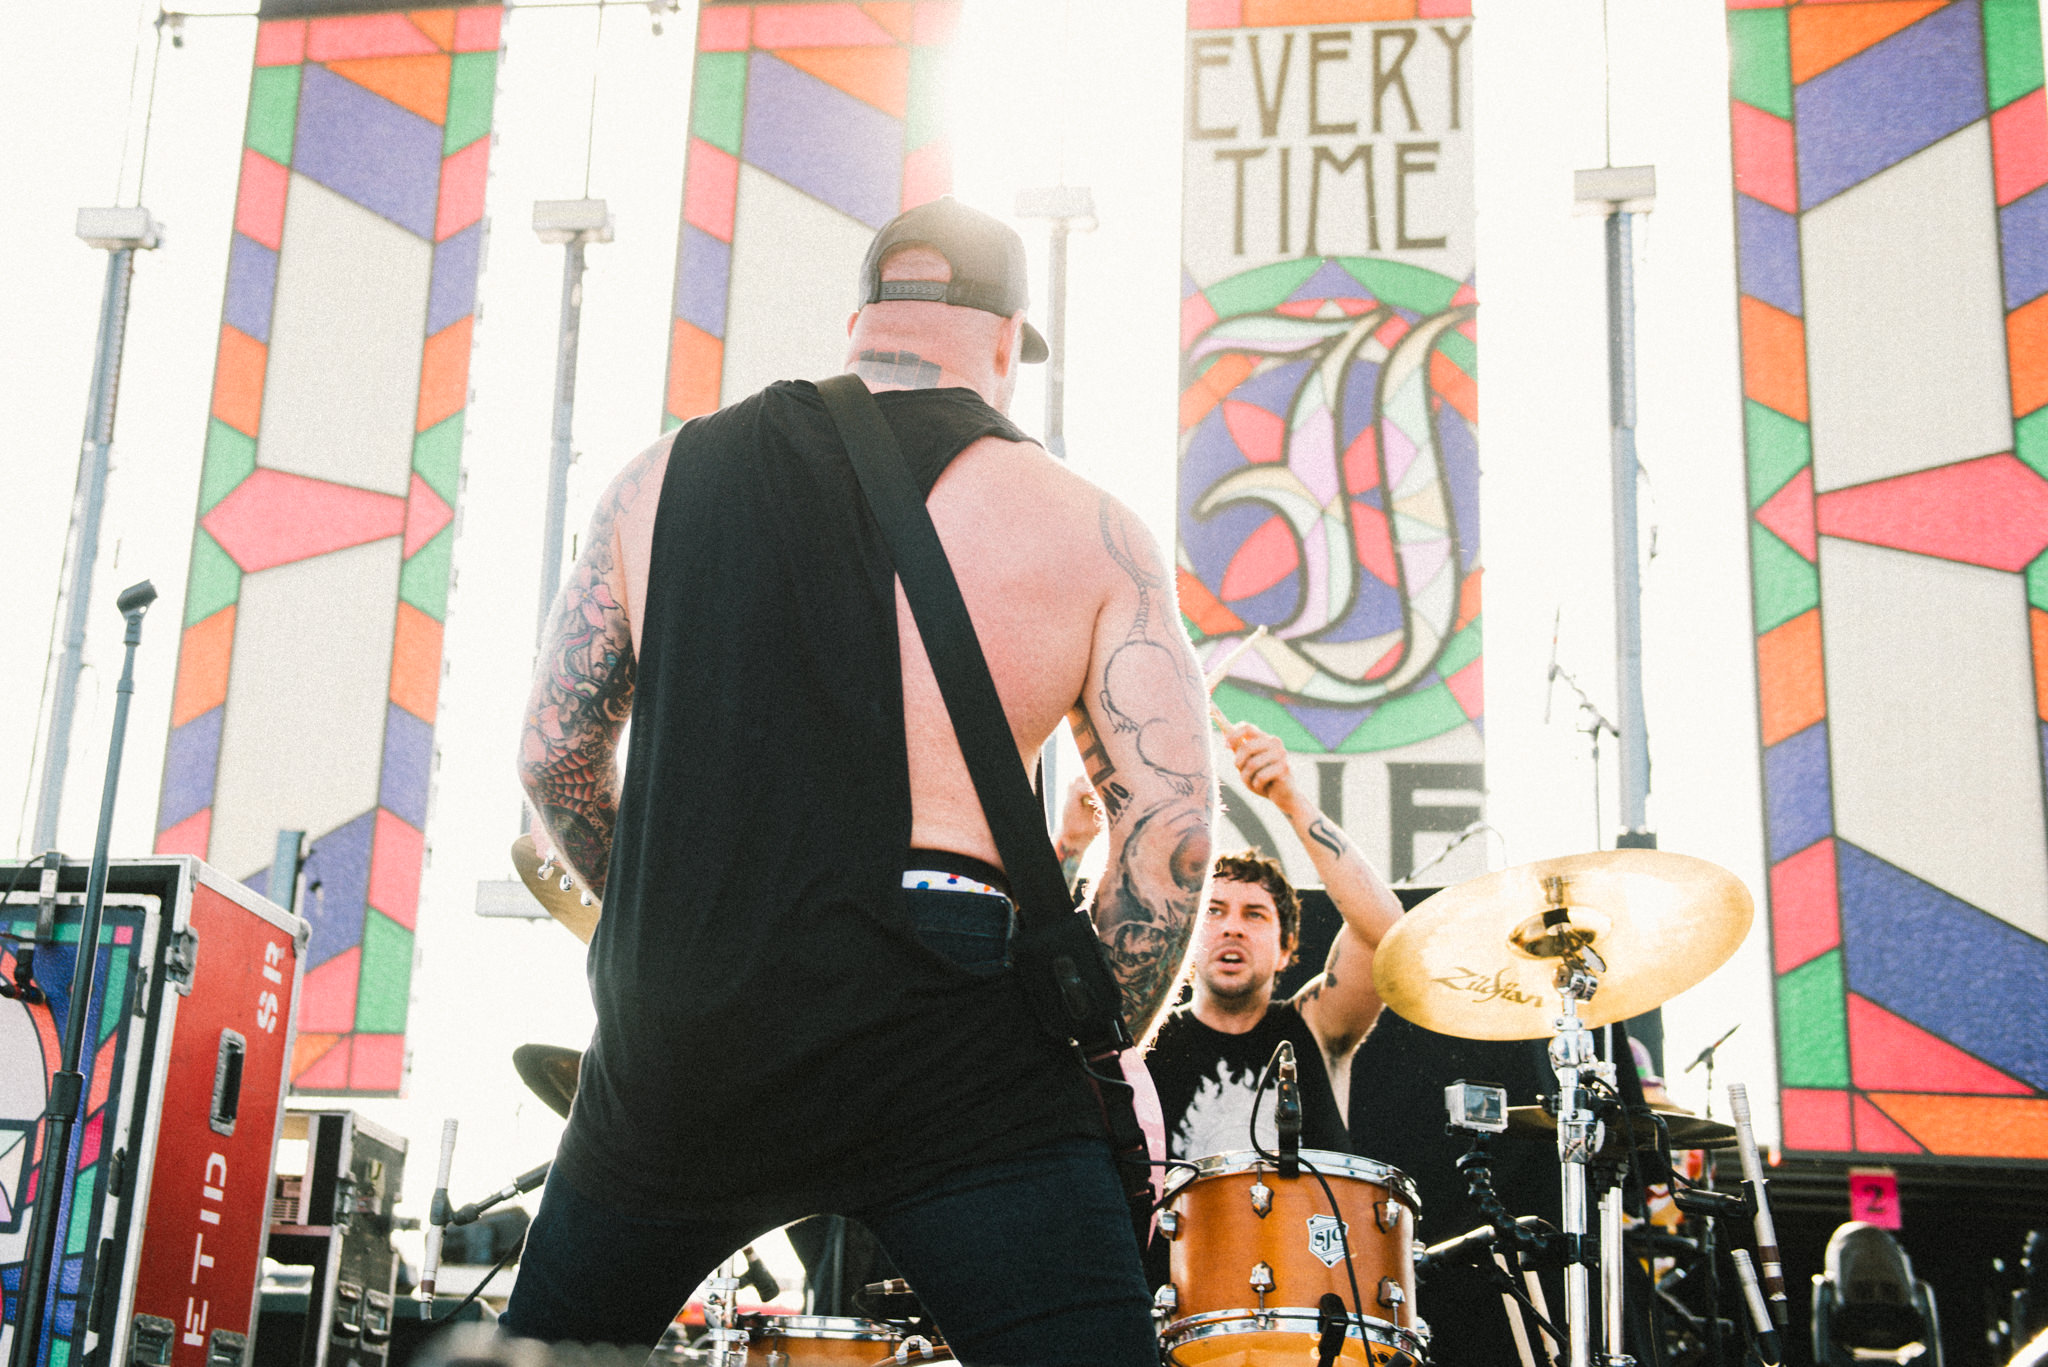 Every Time I Die Stone Pony Summer Stage Stars and Scars Photo